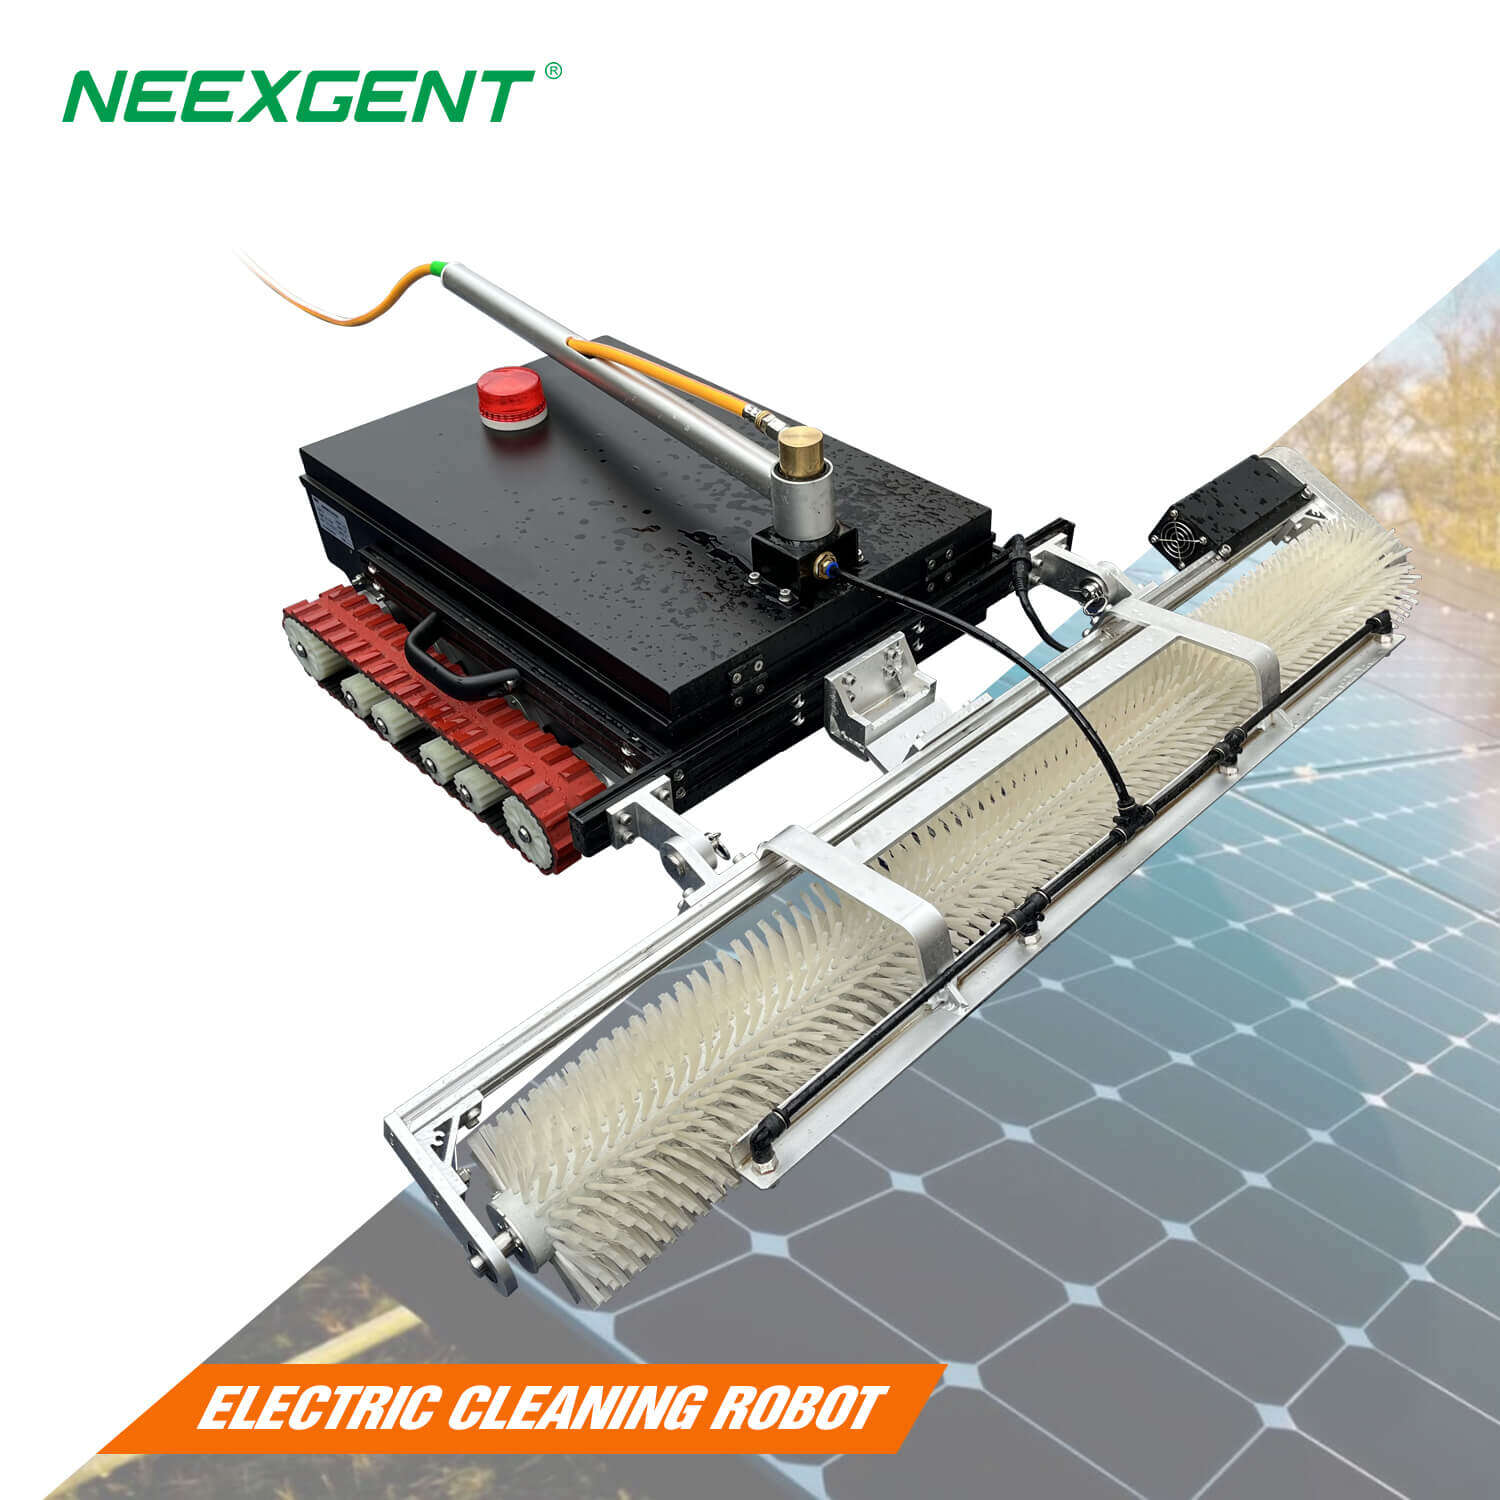 Neexgent Innovative Solar Panel Cleaning Robot Sets New Standards for Efficiency and Sustainability